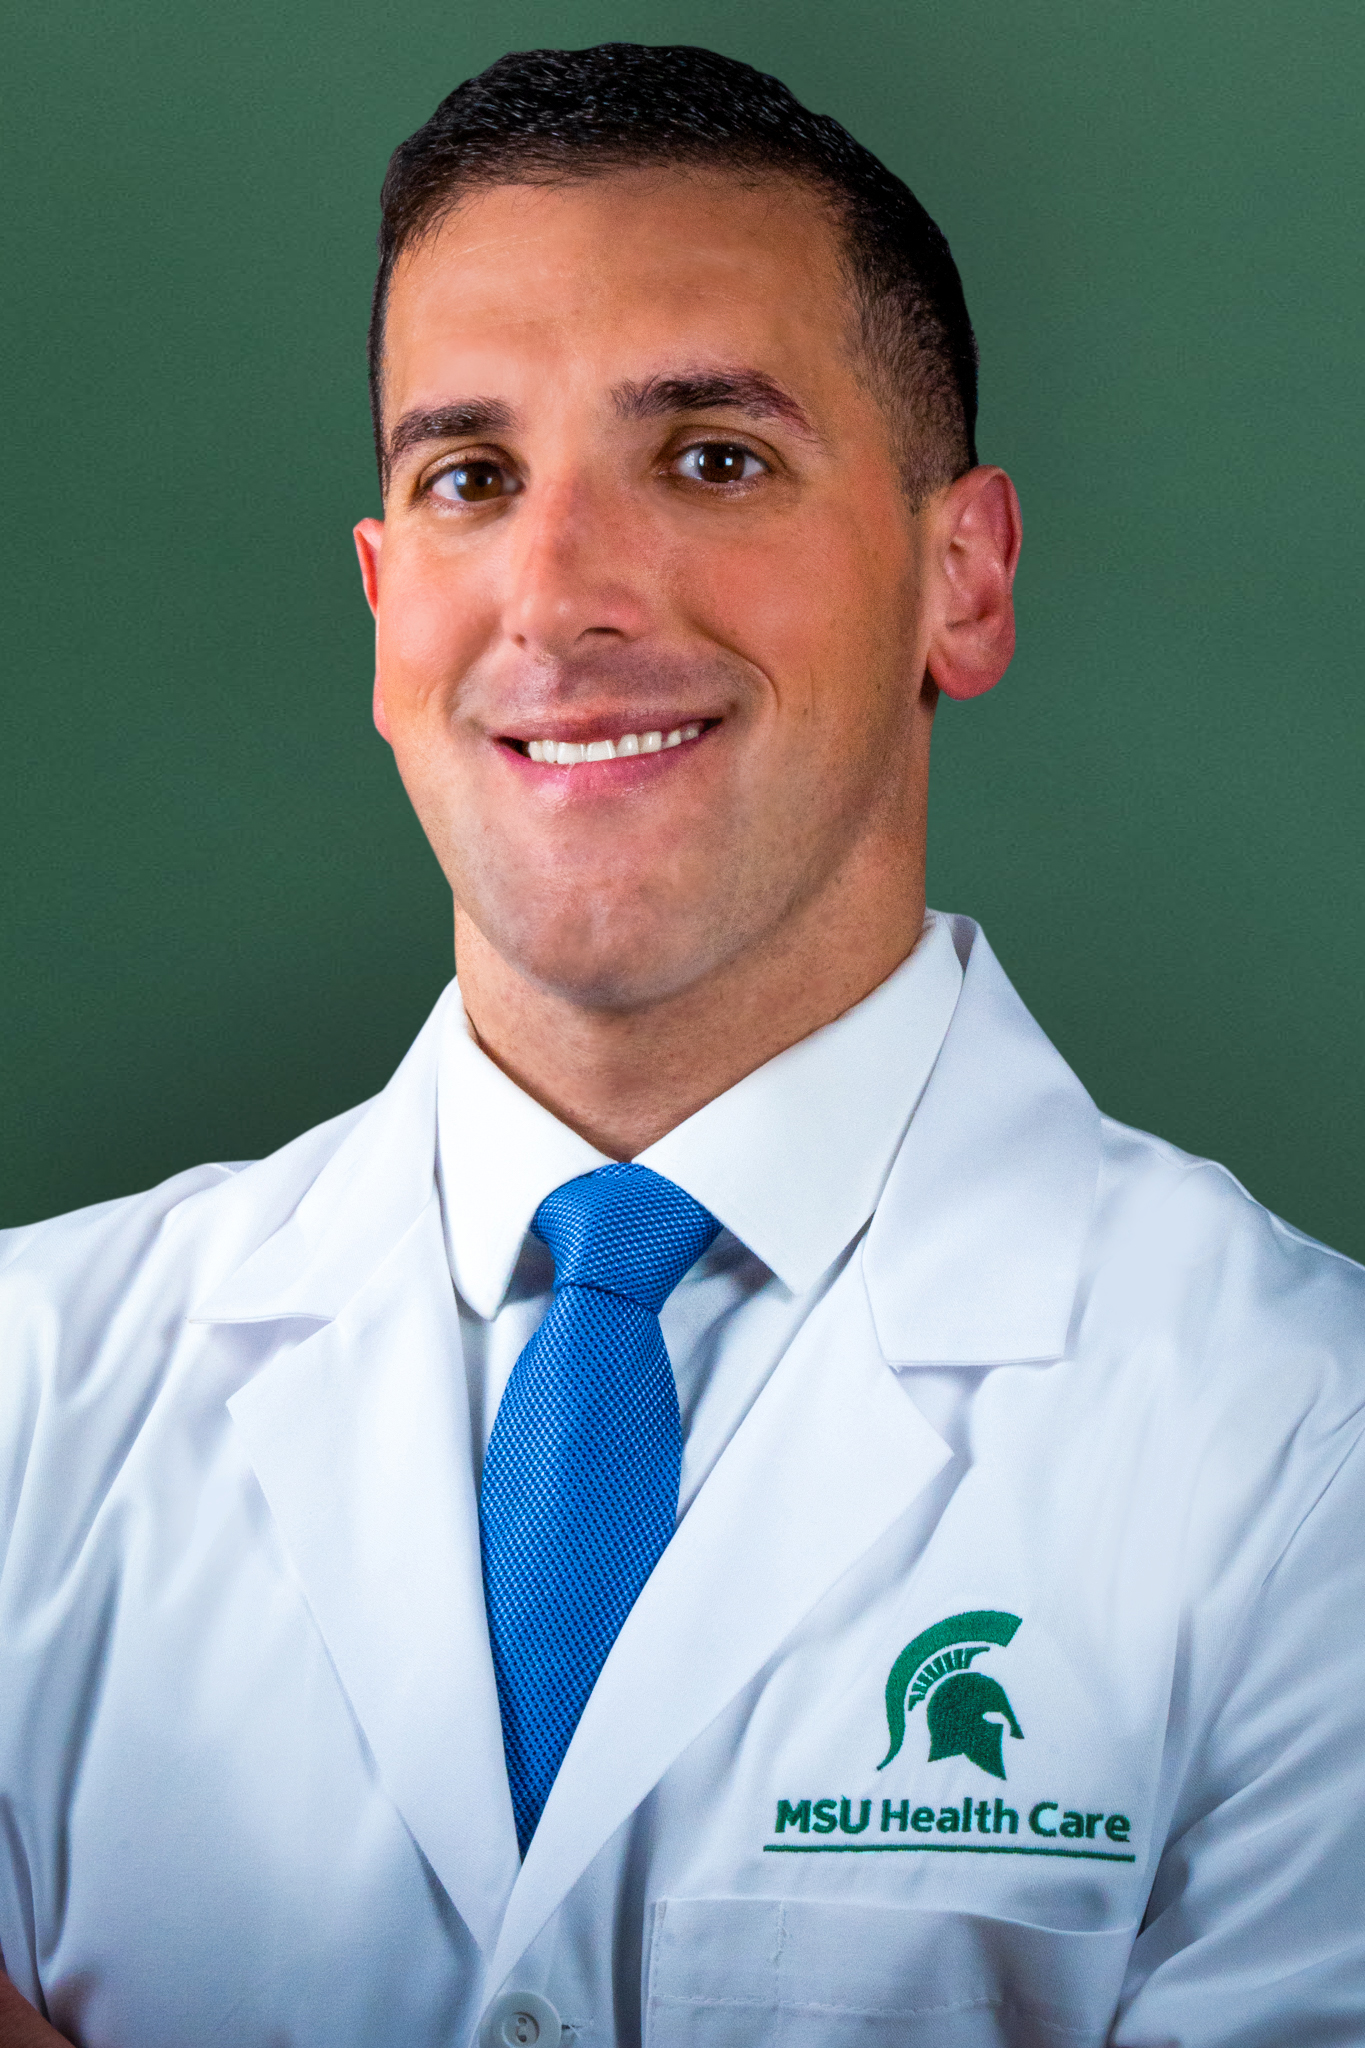 MSU Health Care welcomes Toufic Jildeh, M.D., winner of prestigious sports medicine national award for ground-breaking, non-opioid research study